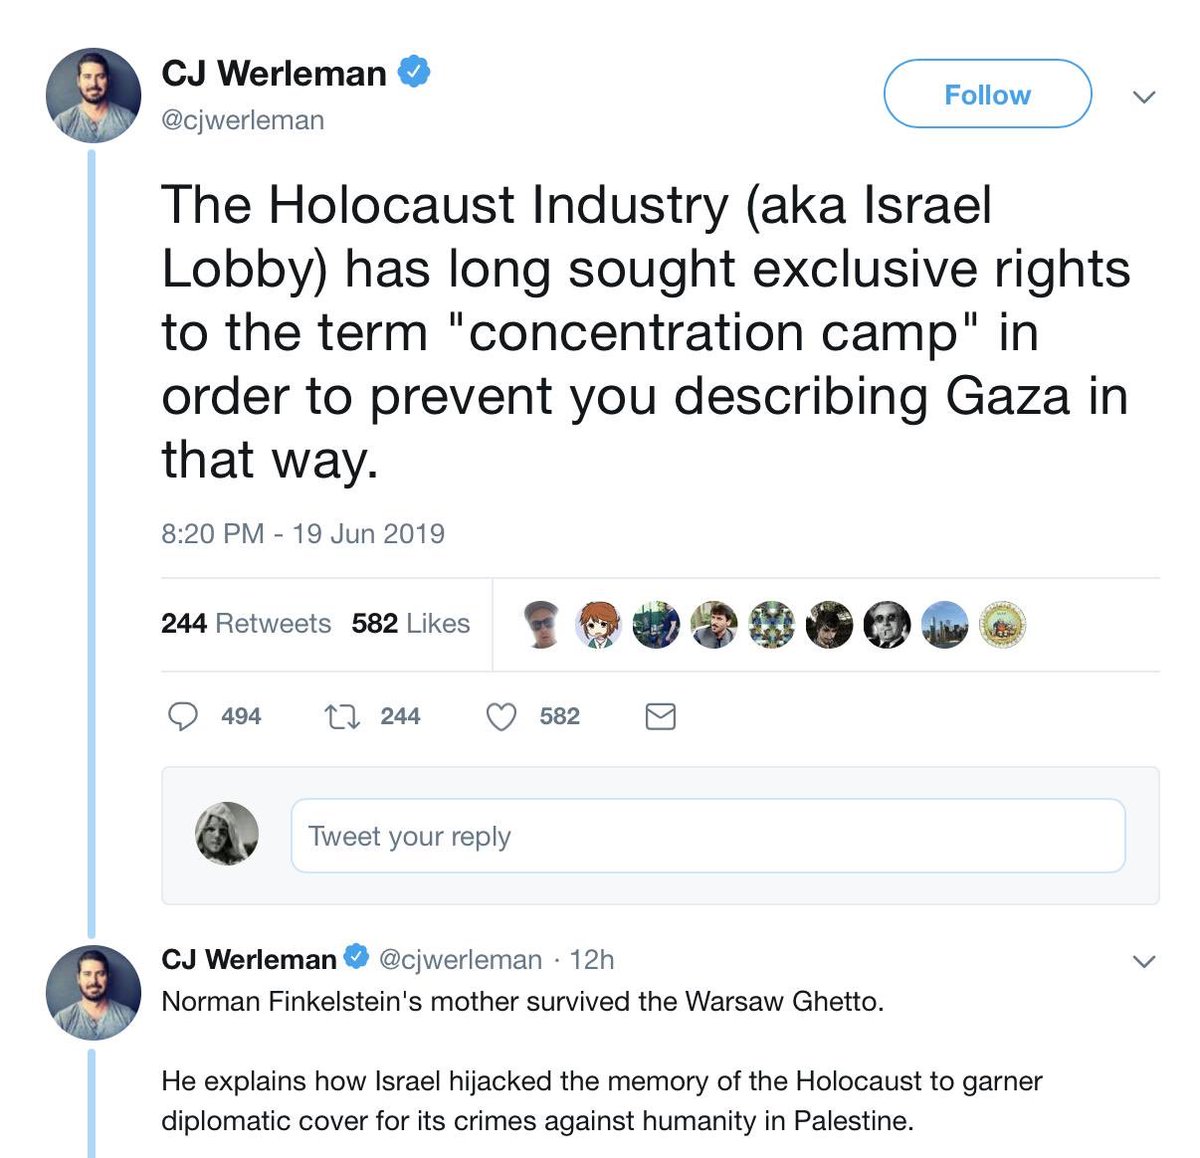 Is there any surprise that CJ is calling for boycott on UAE with his notorious antisemitic history, as well as being financed by extremists groups?